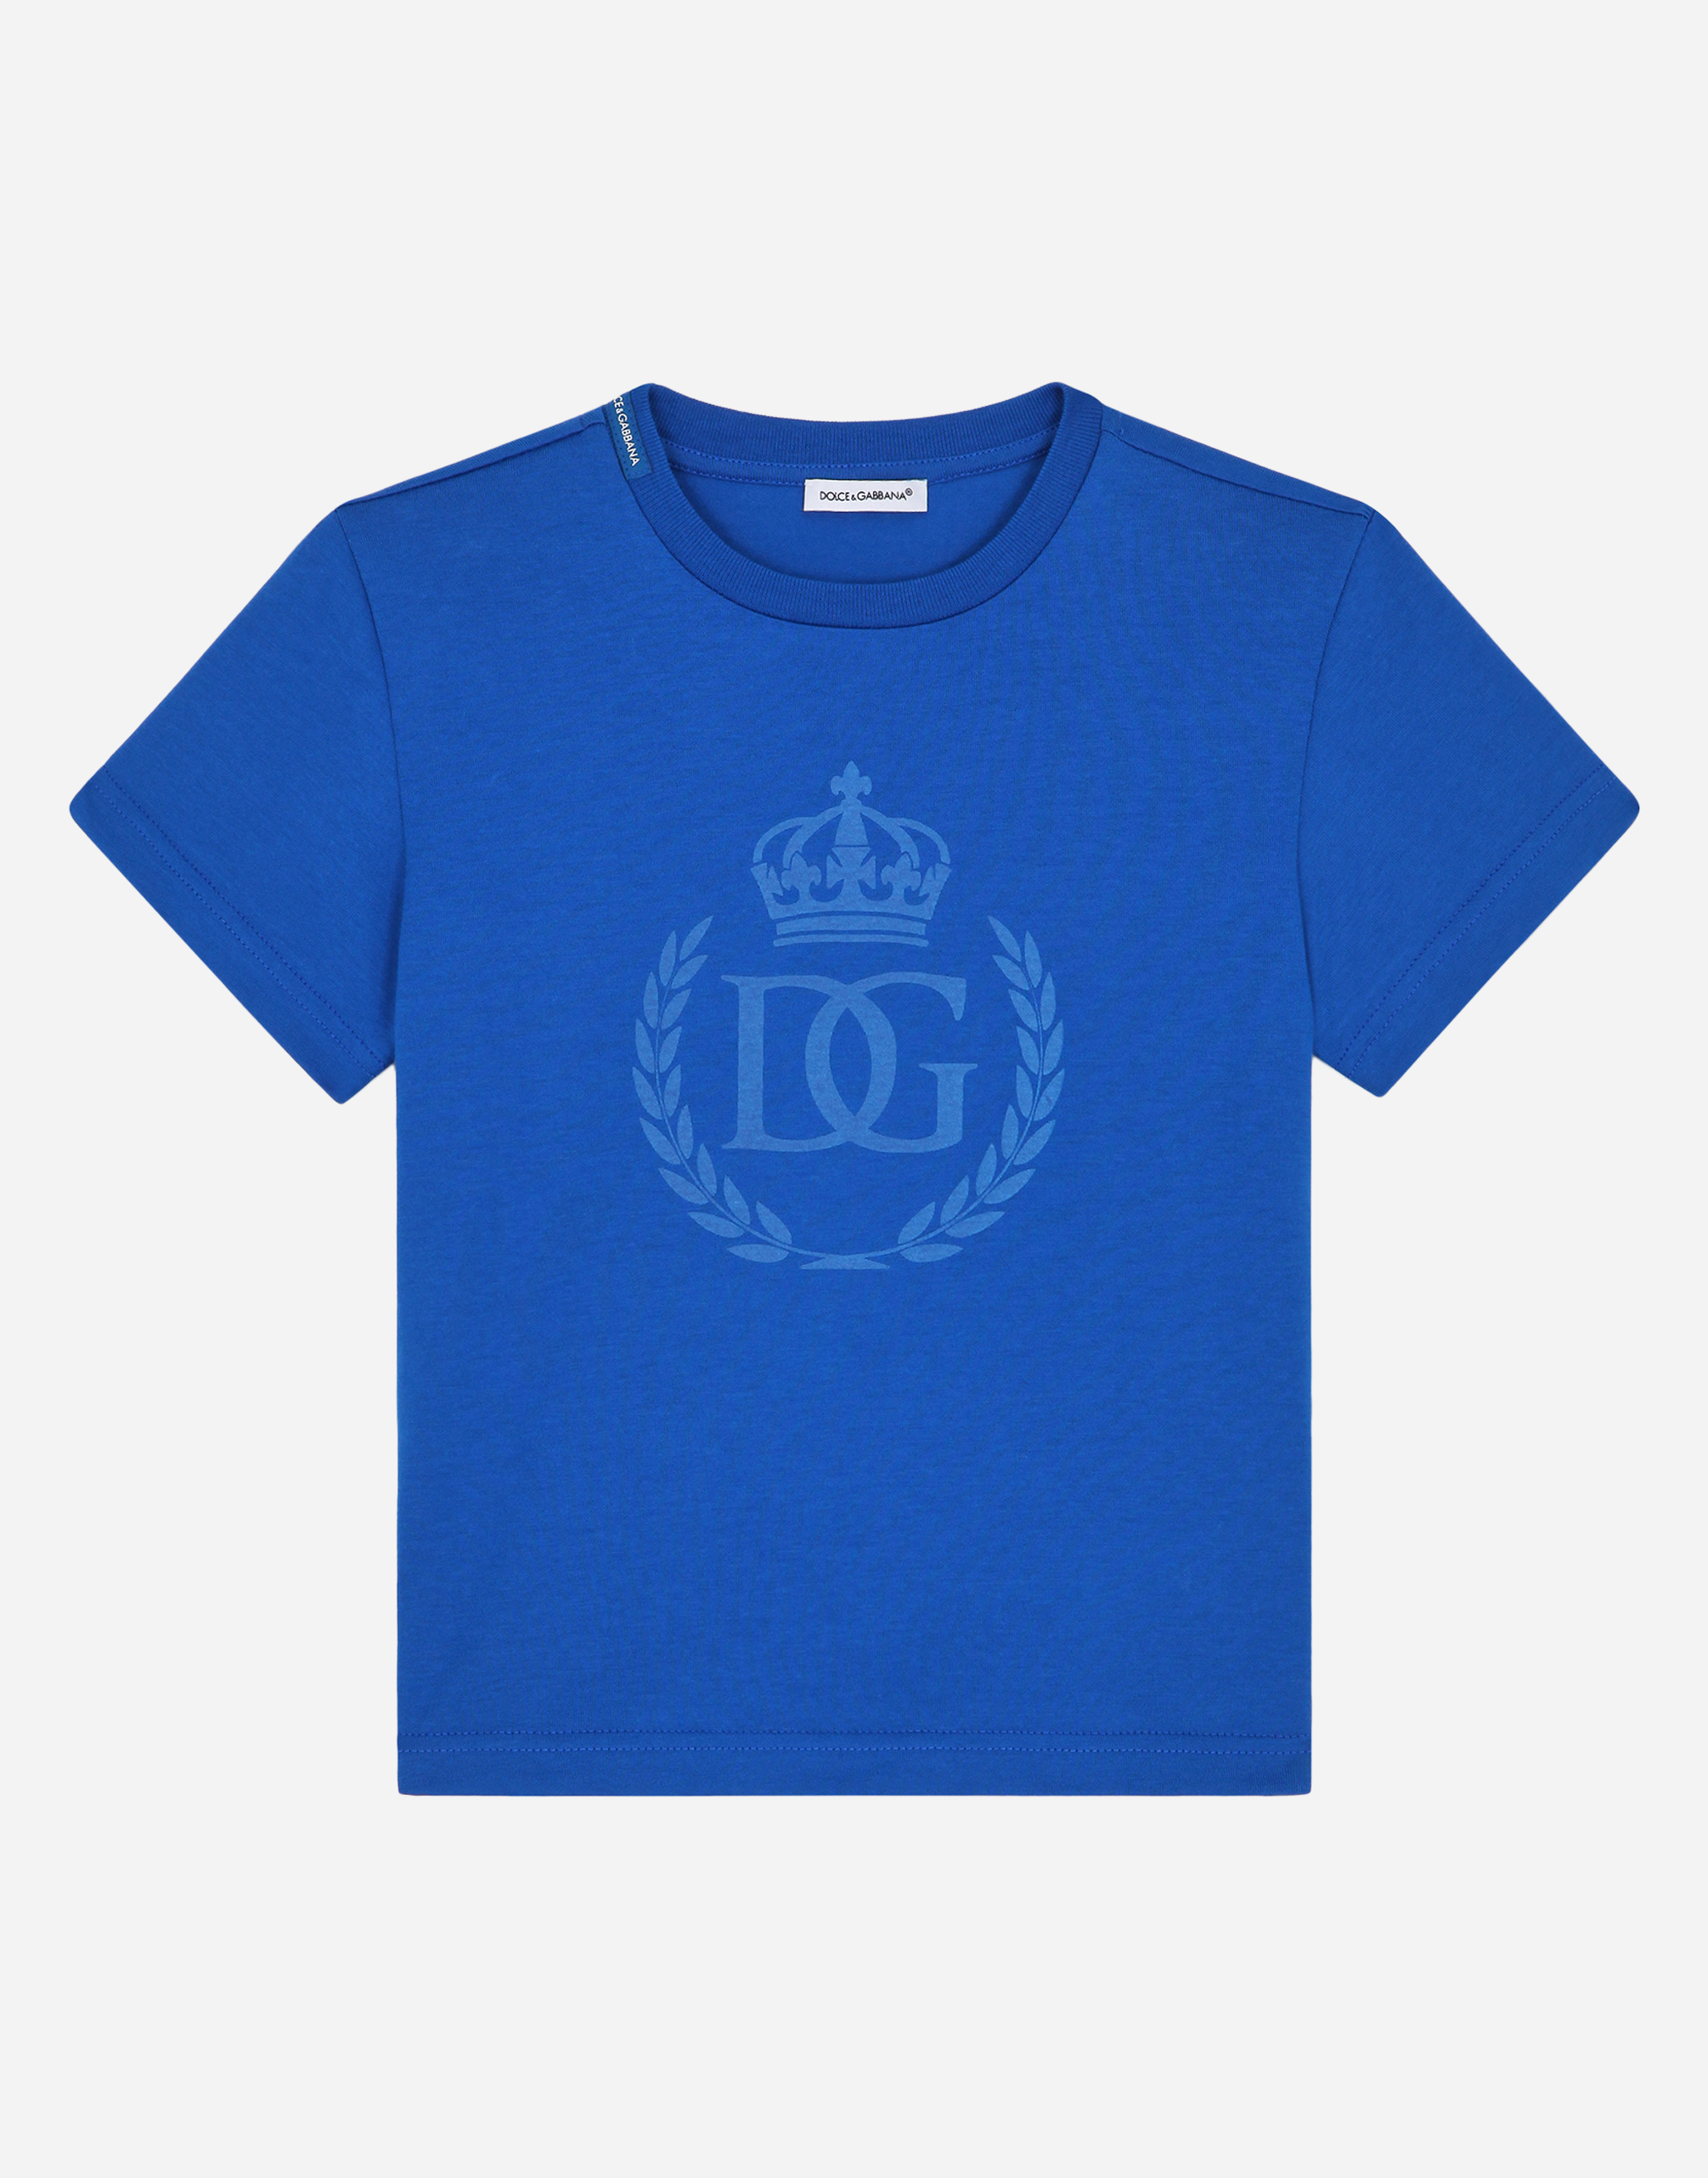 Dolce & Gabbana Kids' Jersey T-shirt With Dg Laurel And Crown Print